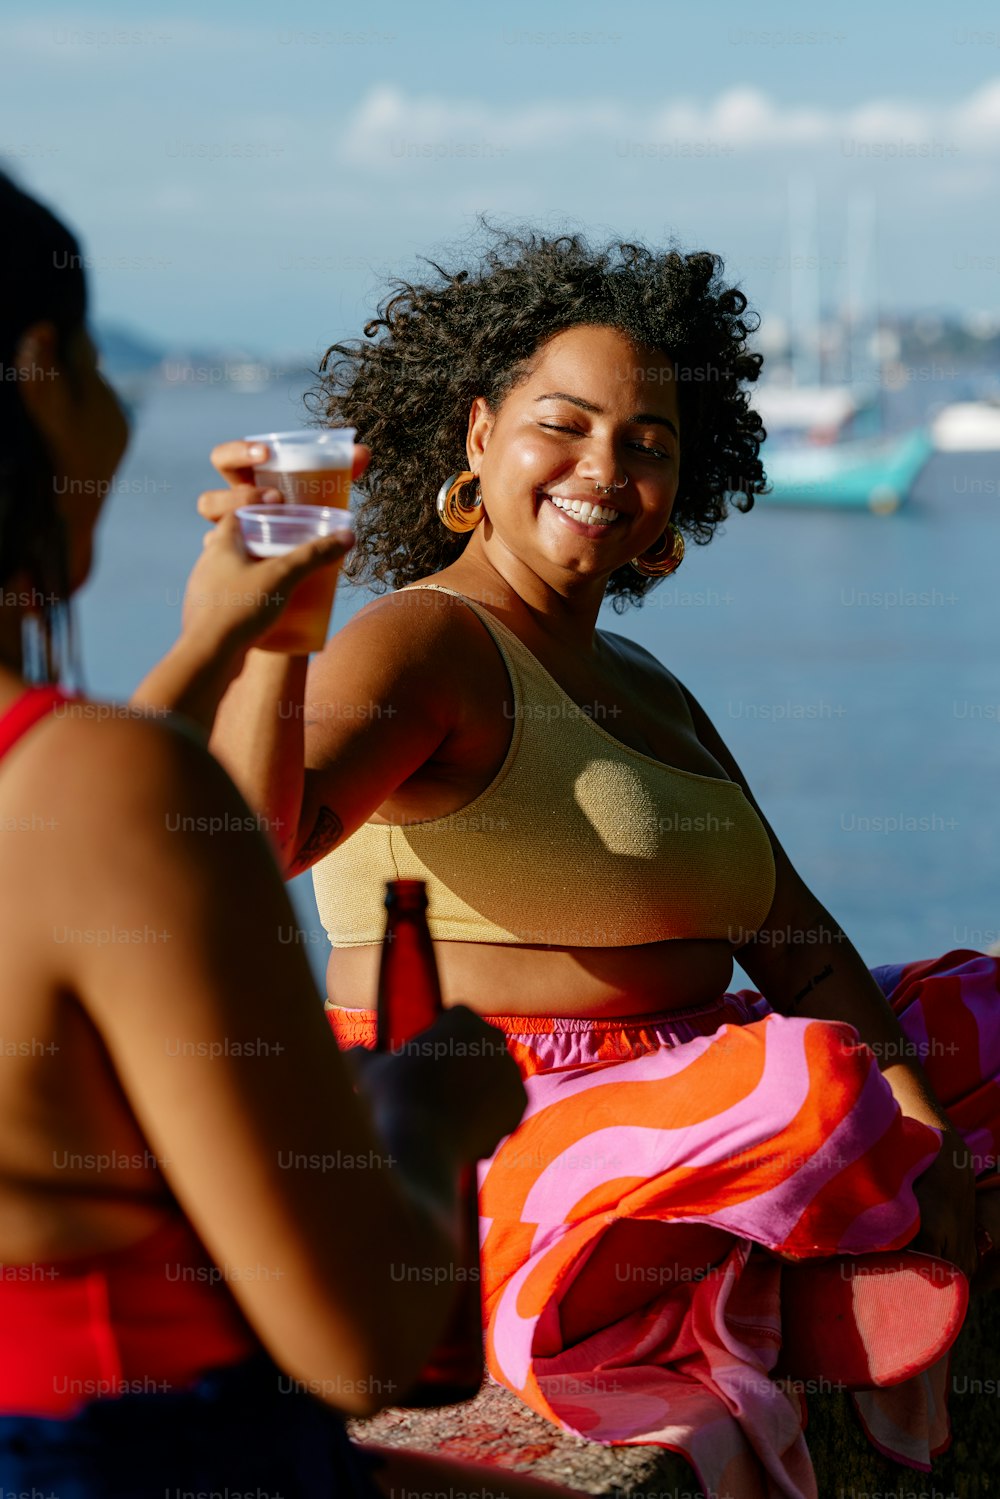 a woman sitting on a bench holding a glass of wine